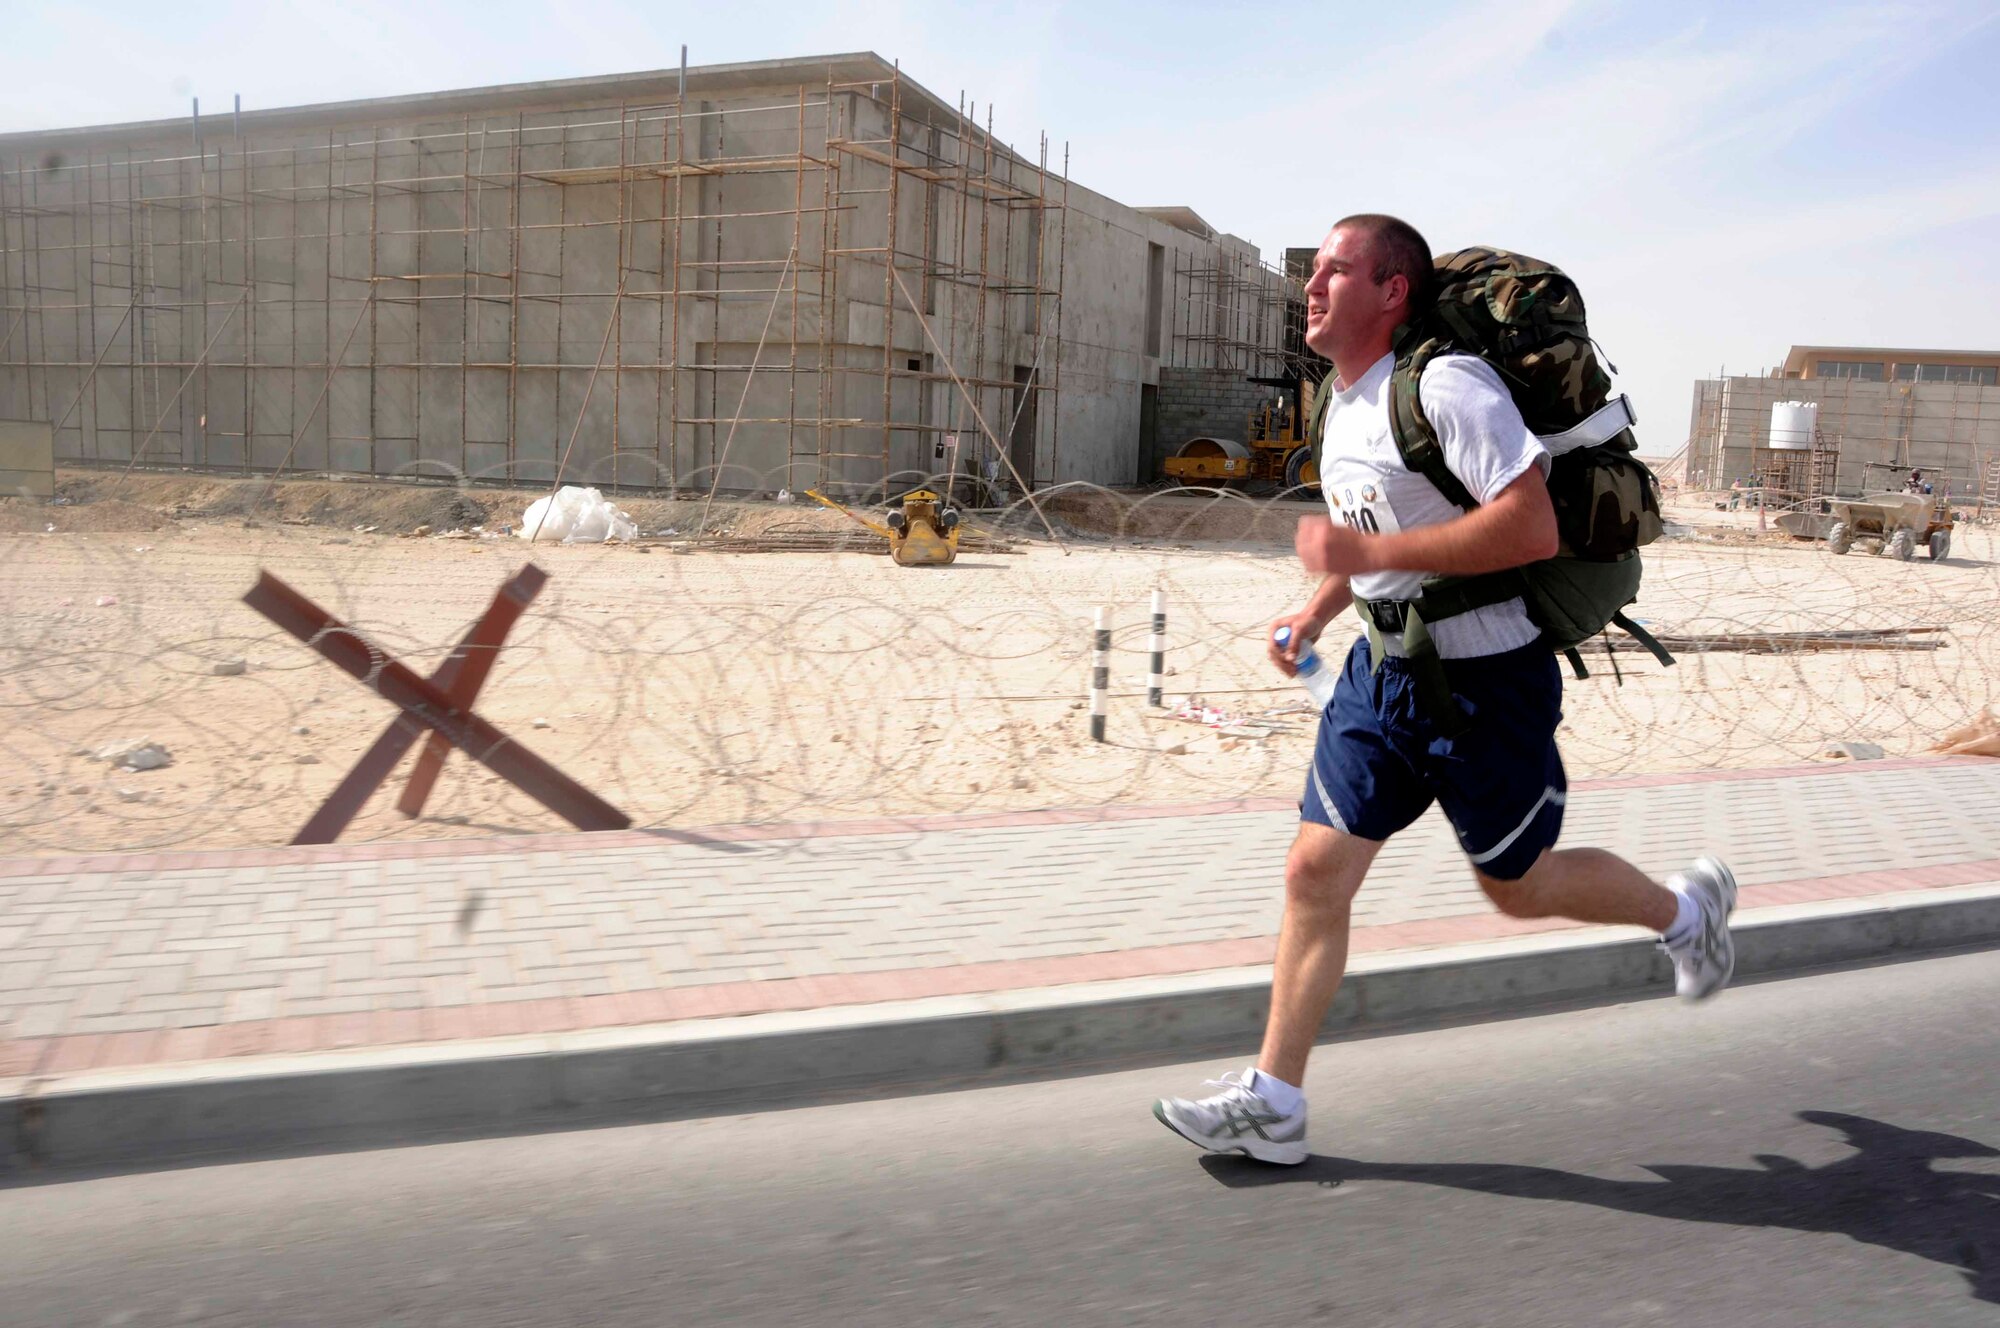 Airman 1st Class Trent Sturguess, 379th Expeditionary Security Forces Squadron, runs the fourth leg of the Bataan Death March Memorial Marathon with a 35-lb rucksack March 29. Airman Sturguess and three other teammates relayed the length of the entire march. (U.S. Air Force photo/ Senior Airman Domonique Simmons)